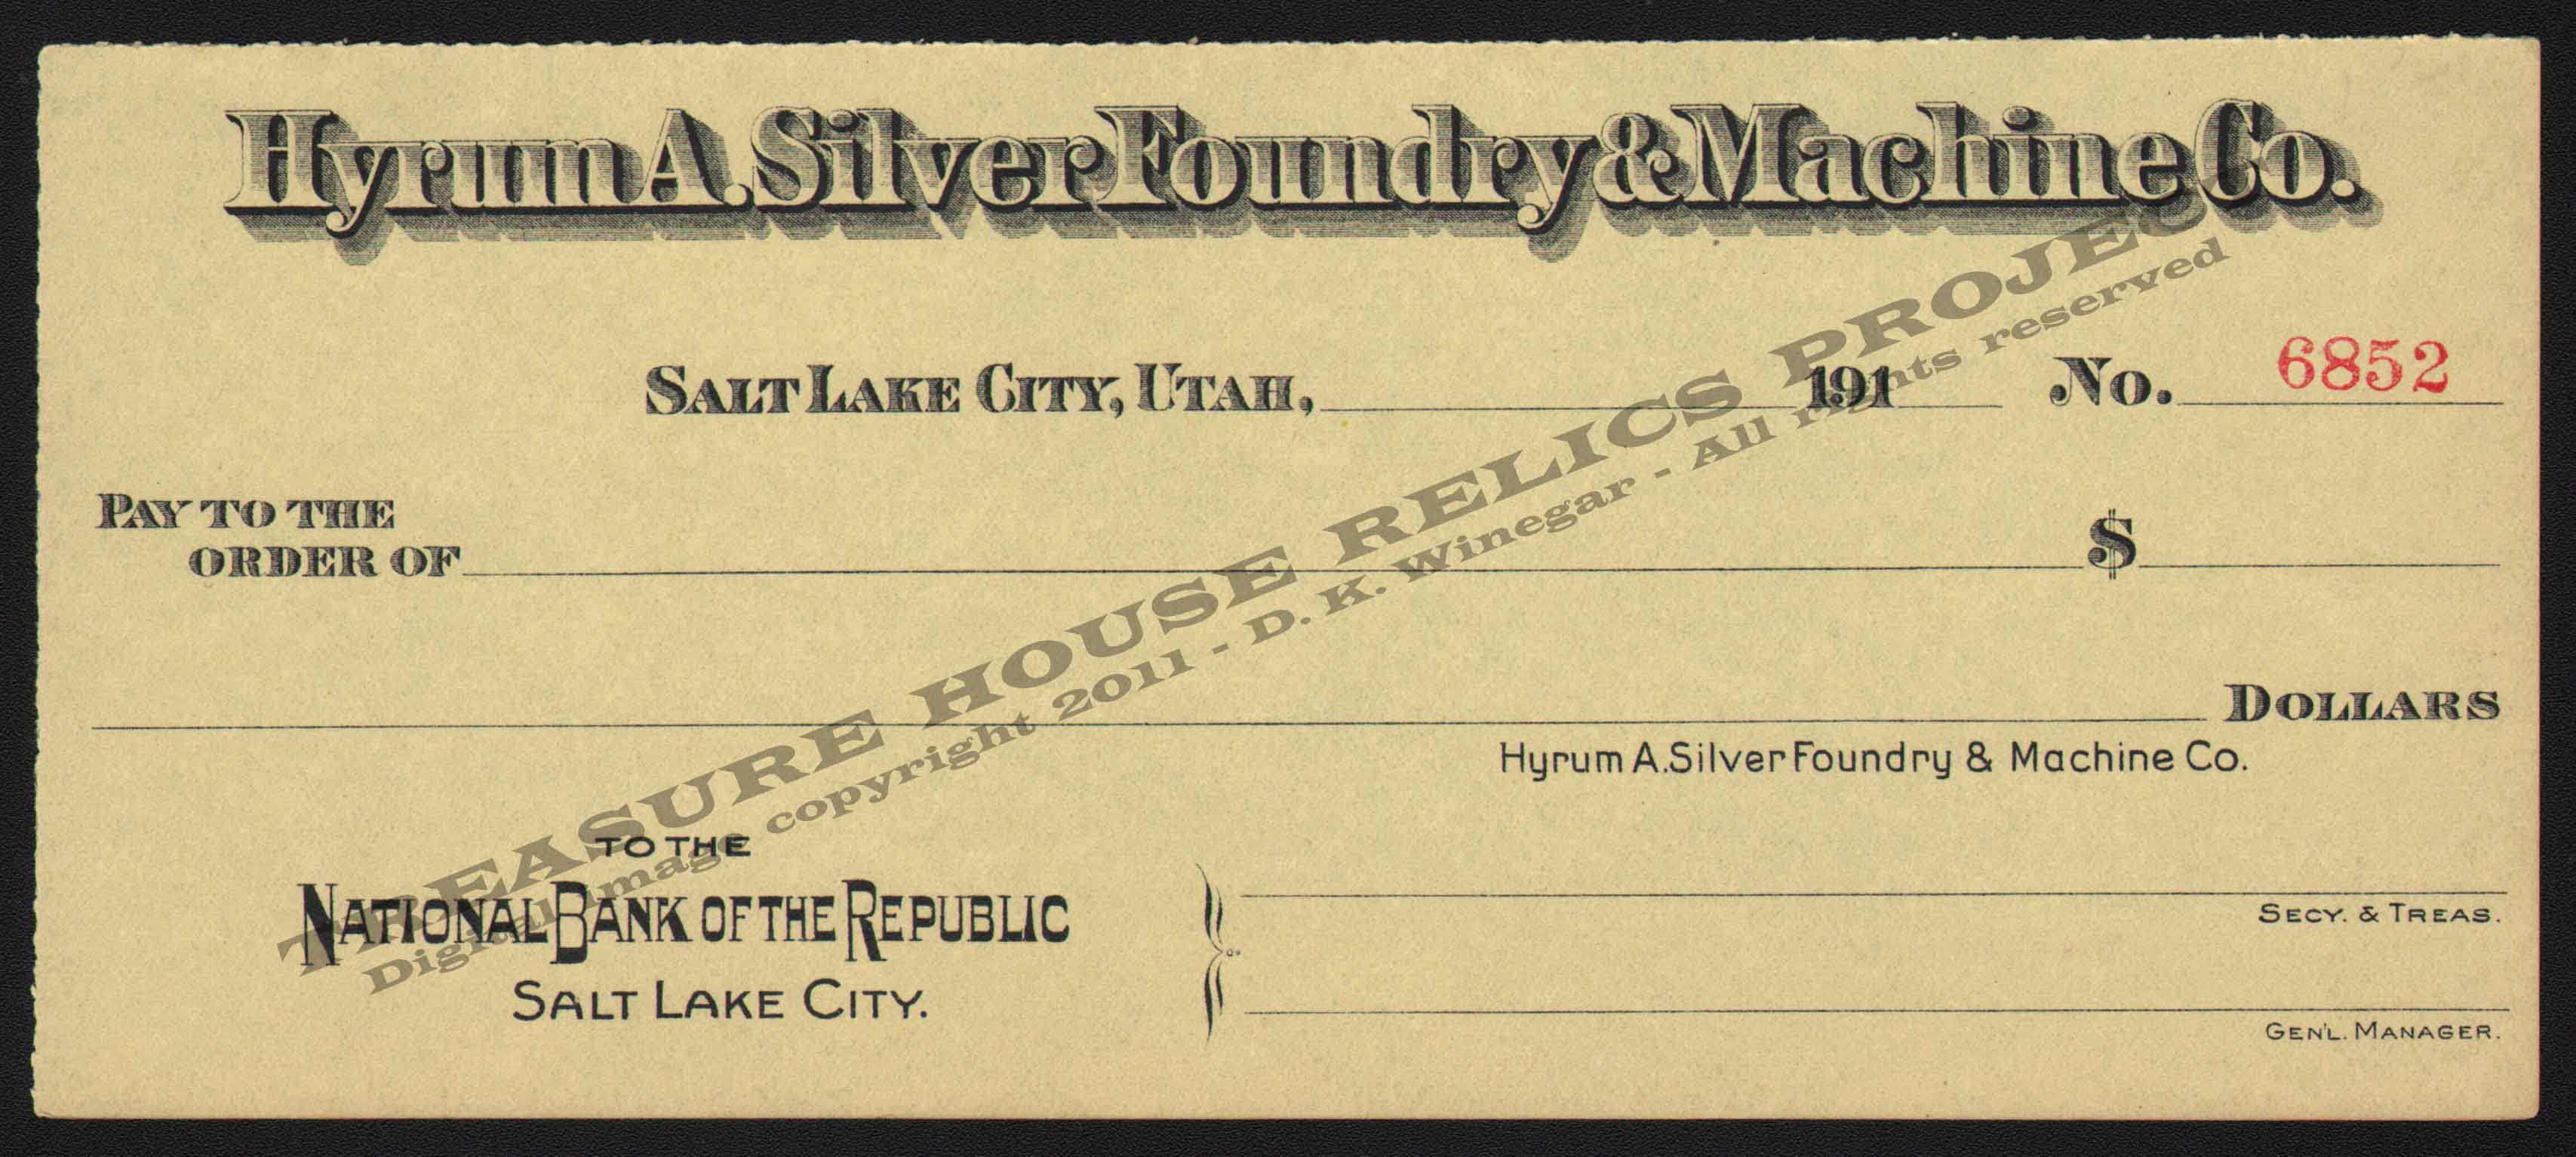 CHECK_-_HYRUM_A_SILVER_CO_NATIONAL_BANK_OF_THE_REPUBLIC_6852_191X_400_EMBOSS.jpg